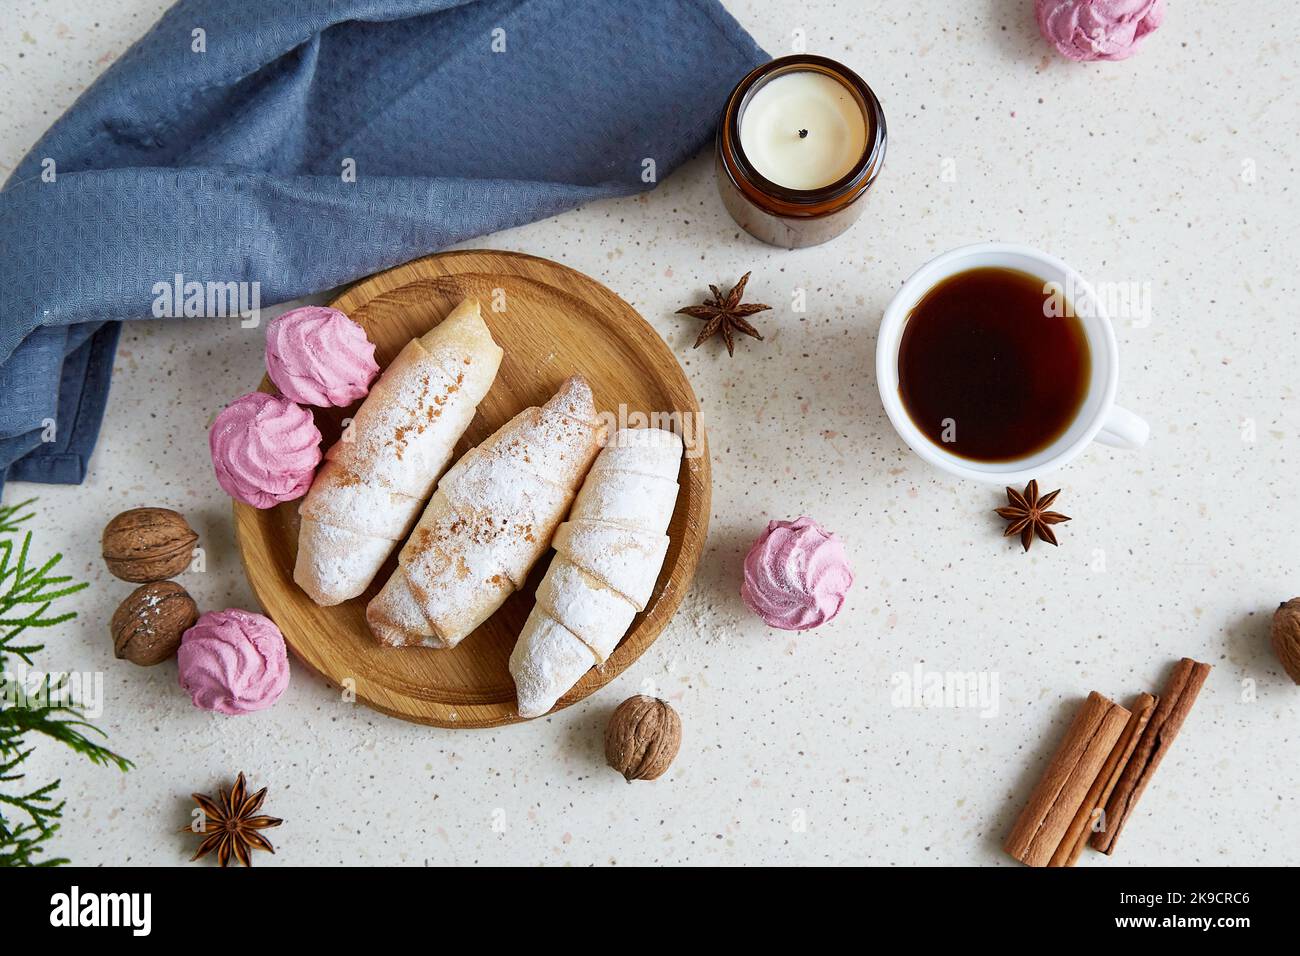 Cozy aesthetic handmade Christmas crescent bagels with cinnamon sticks, marshmallow, walnuts and coffee. Cozy home. Stock Photo